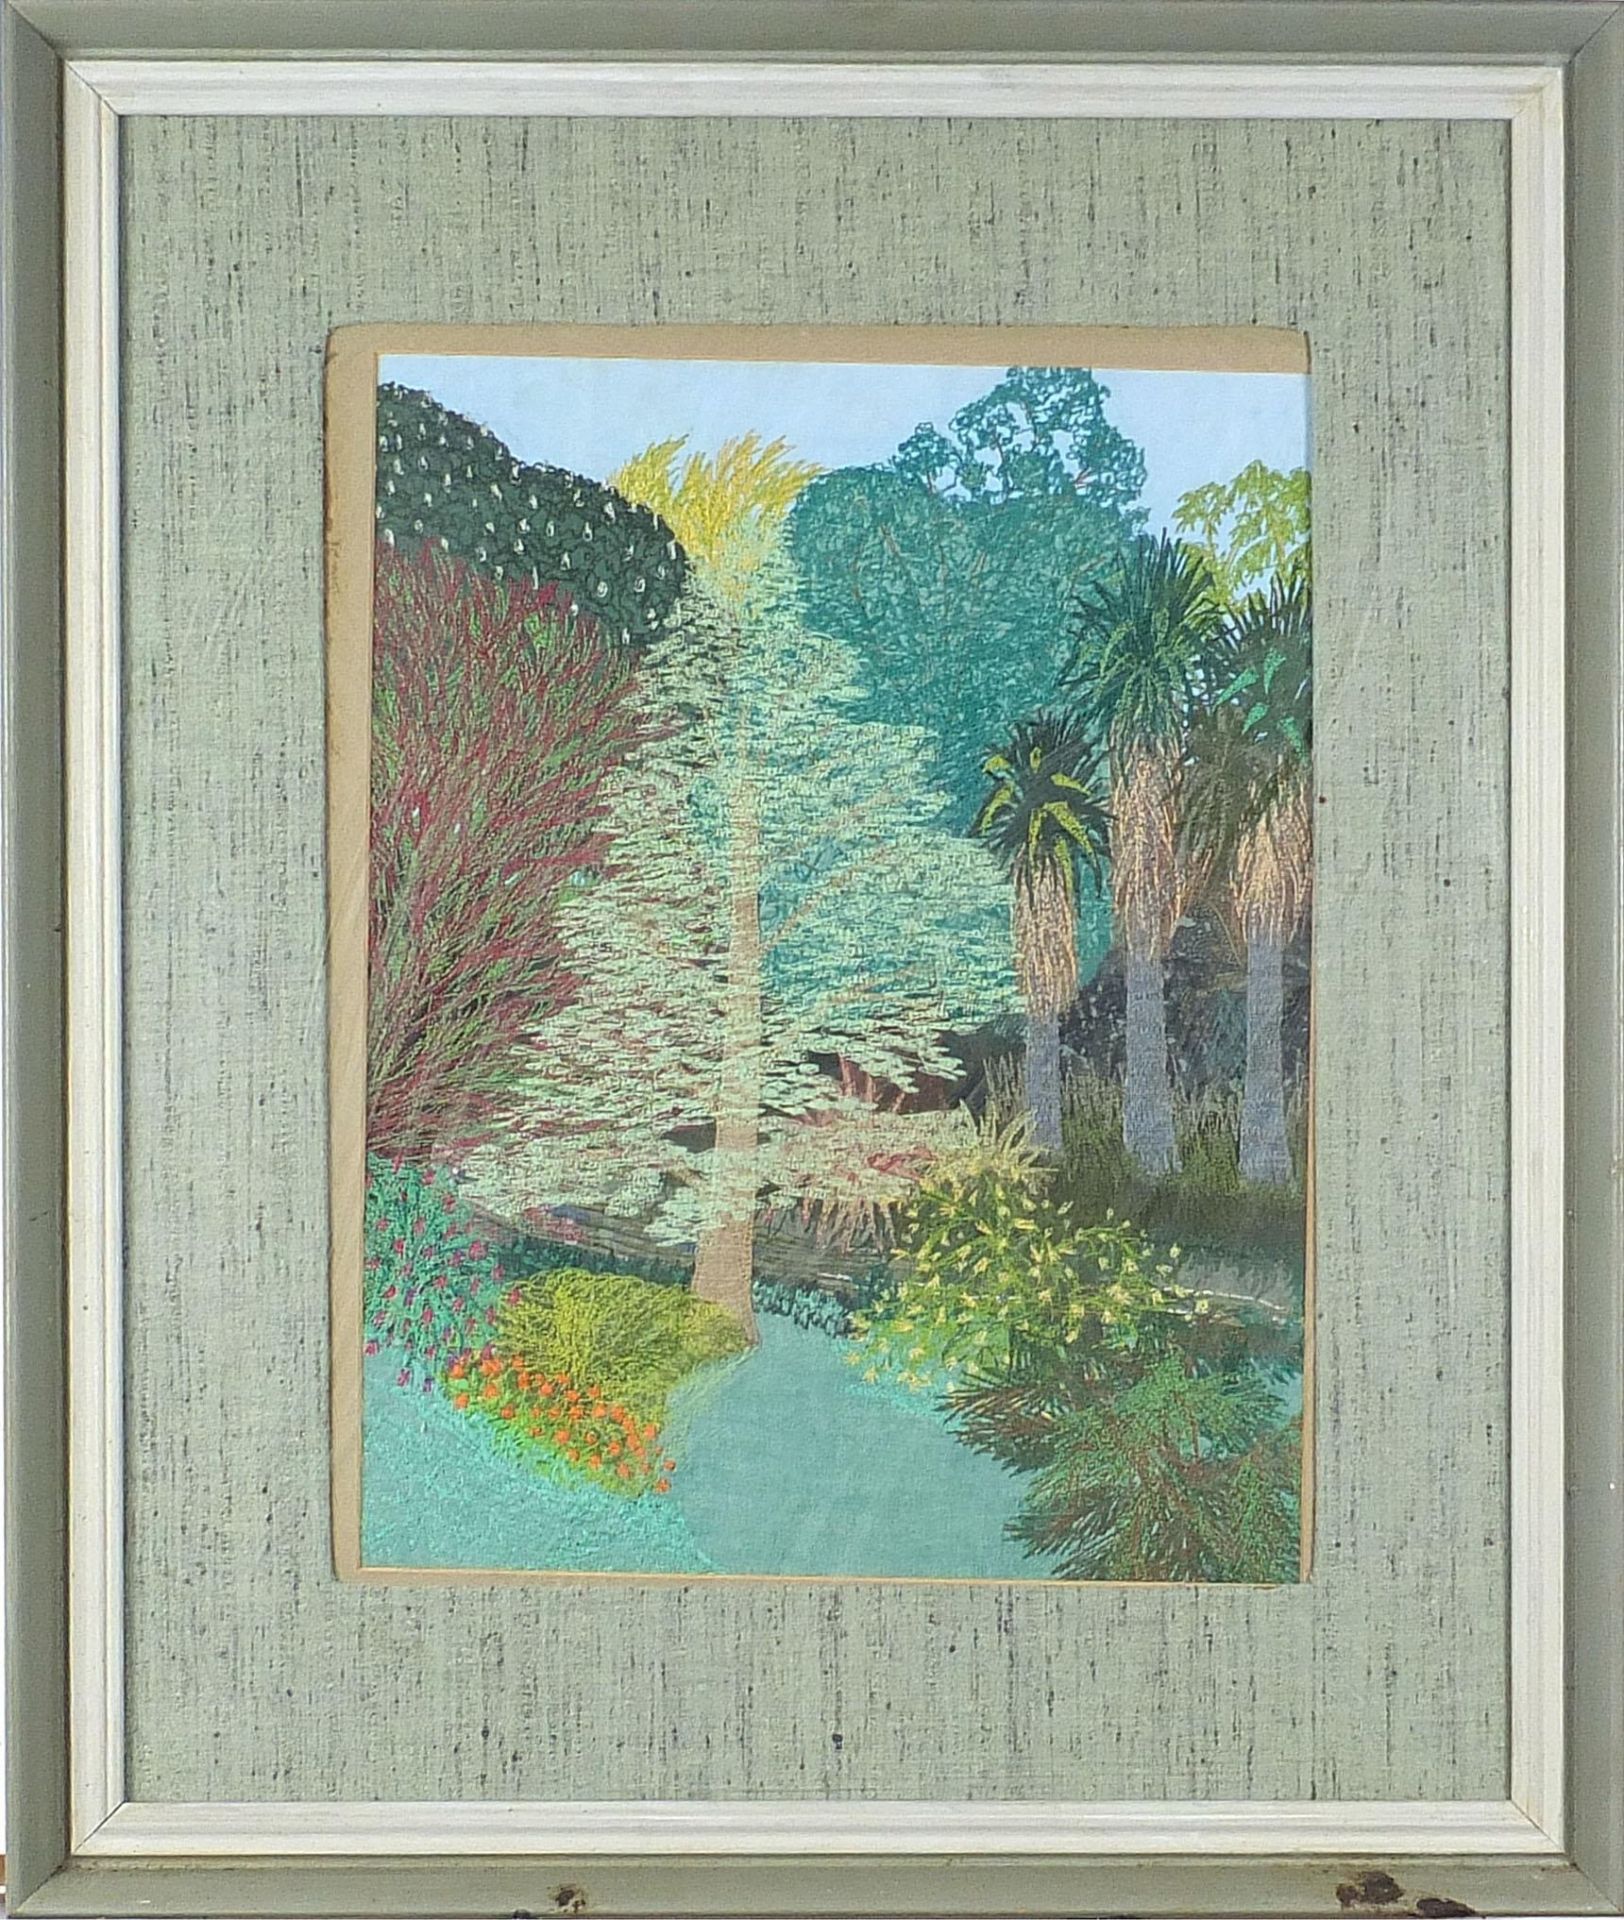 Gillian Wills - Cordyline Australis in a New Zealand garden, machine stitched embroidery, - Image 2 of 7